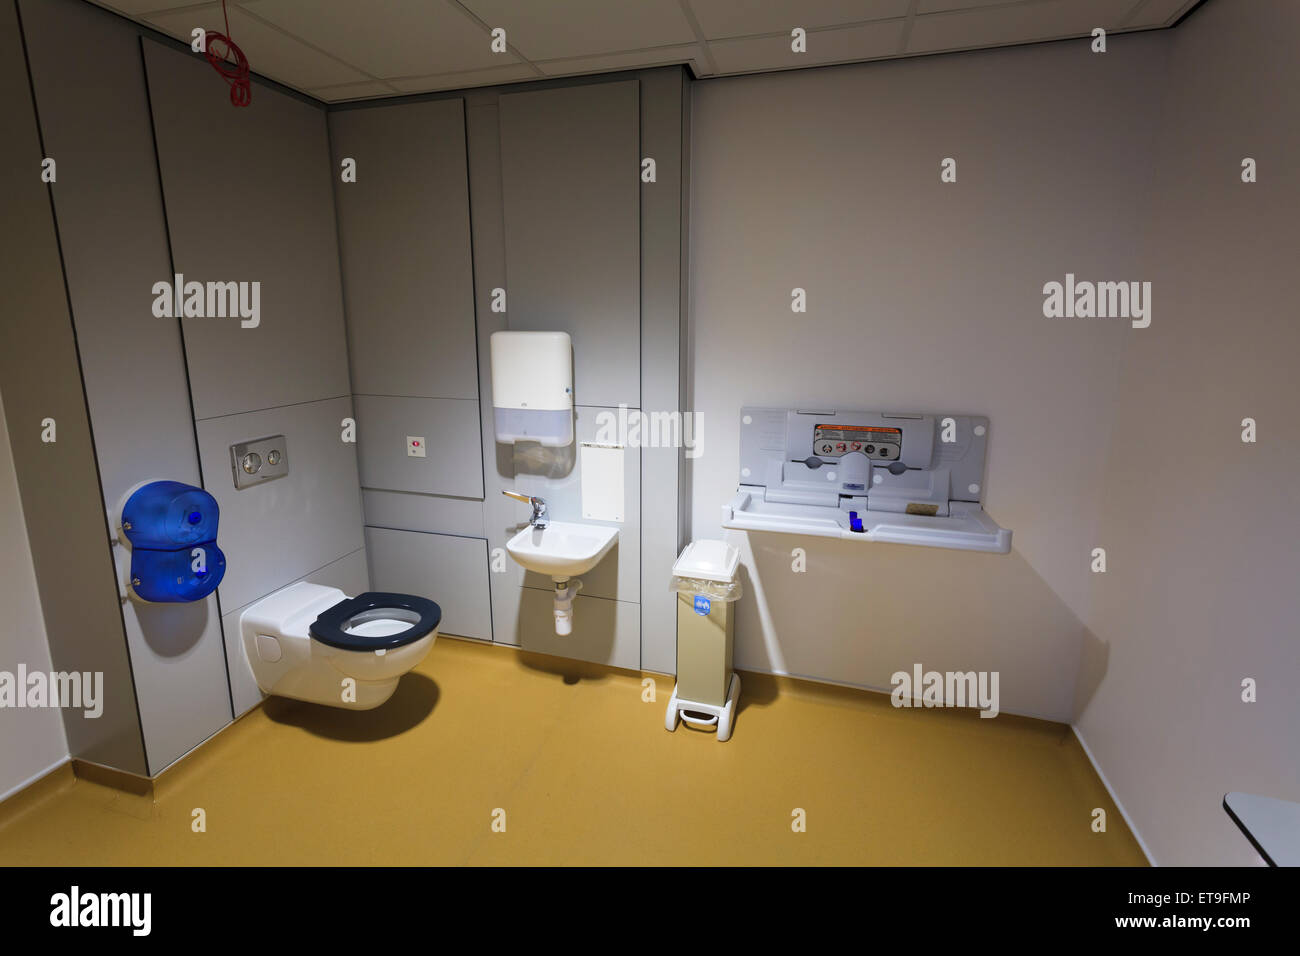 Commercial building toilet with wall mounted lay flat baby changing unit Stock Photo